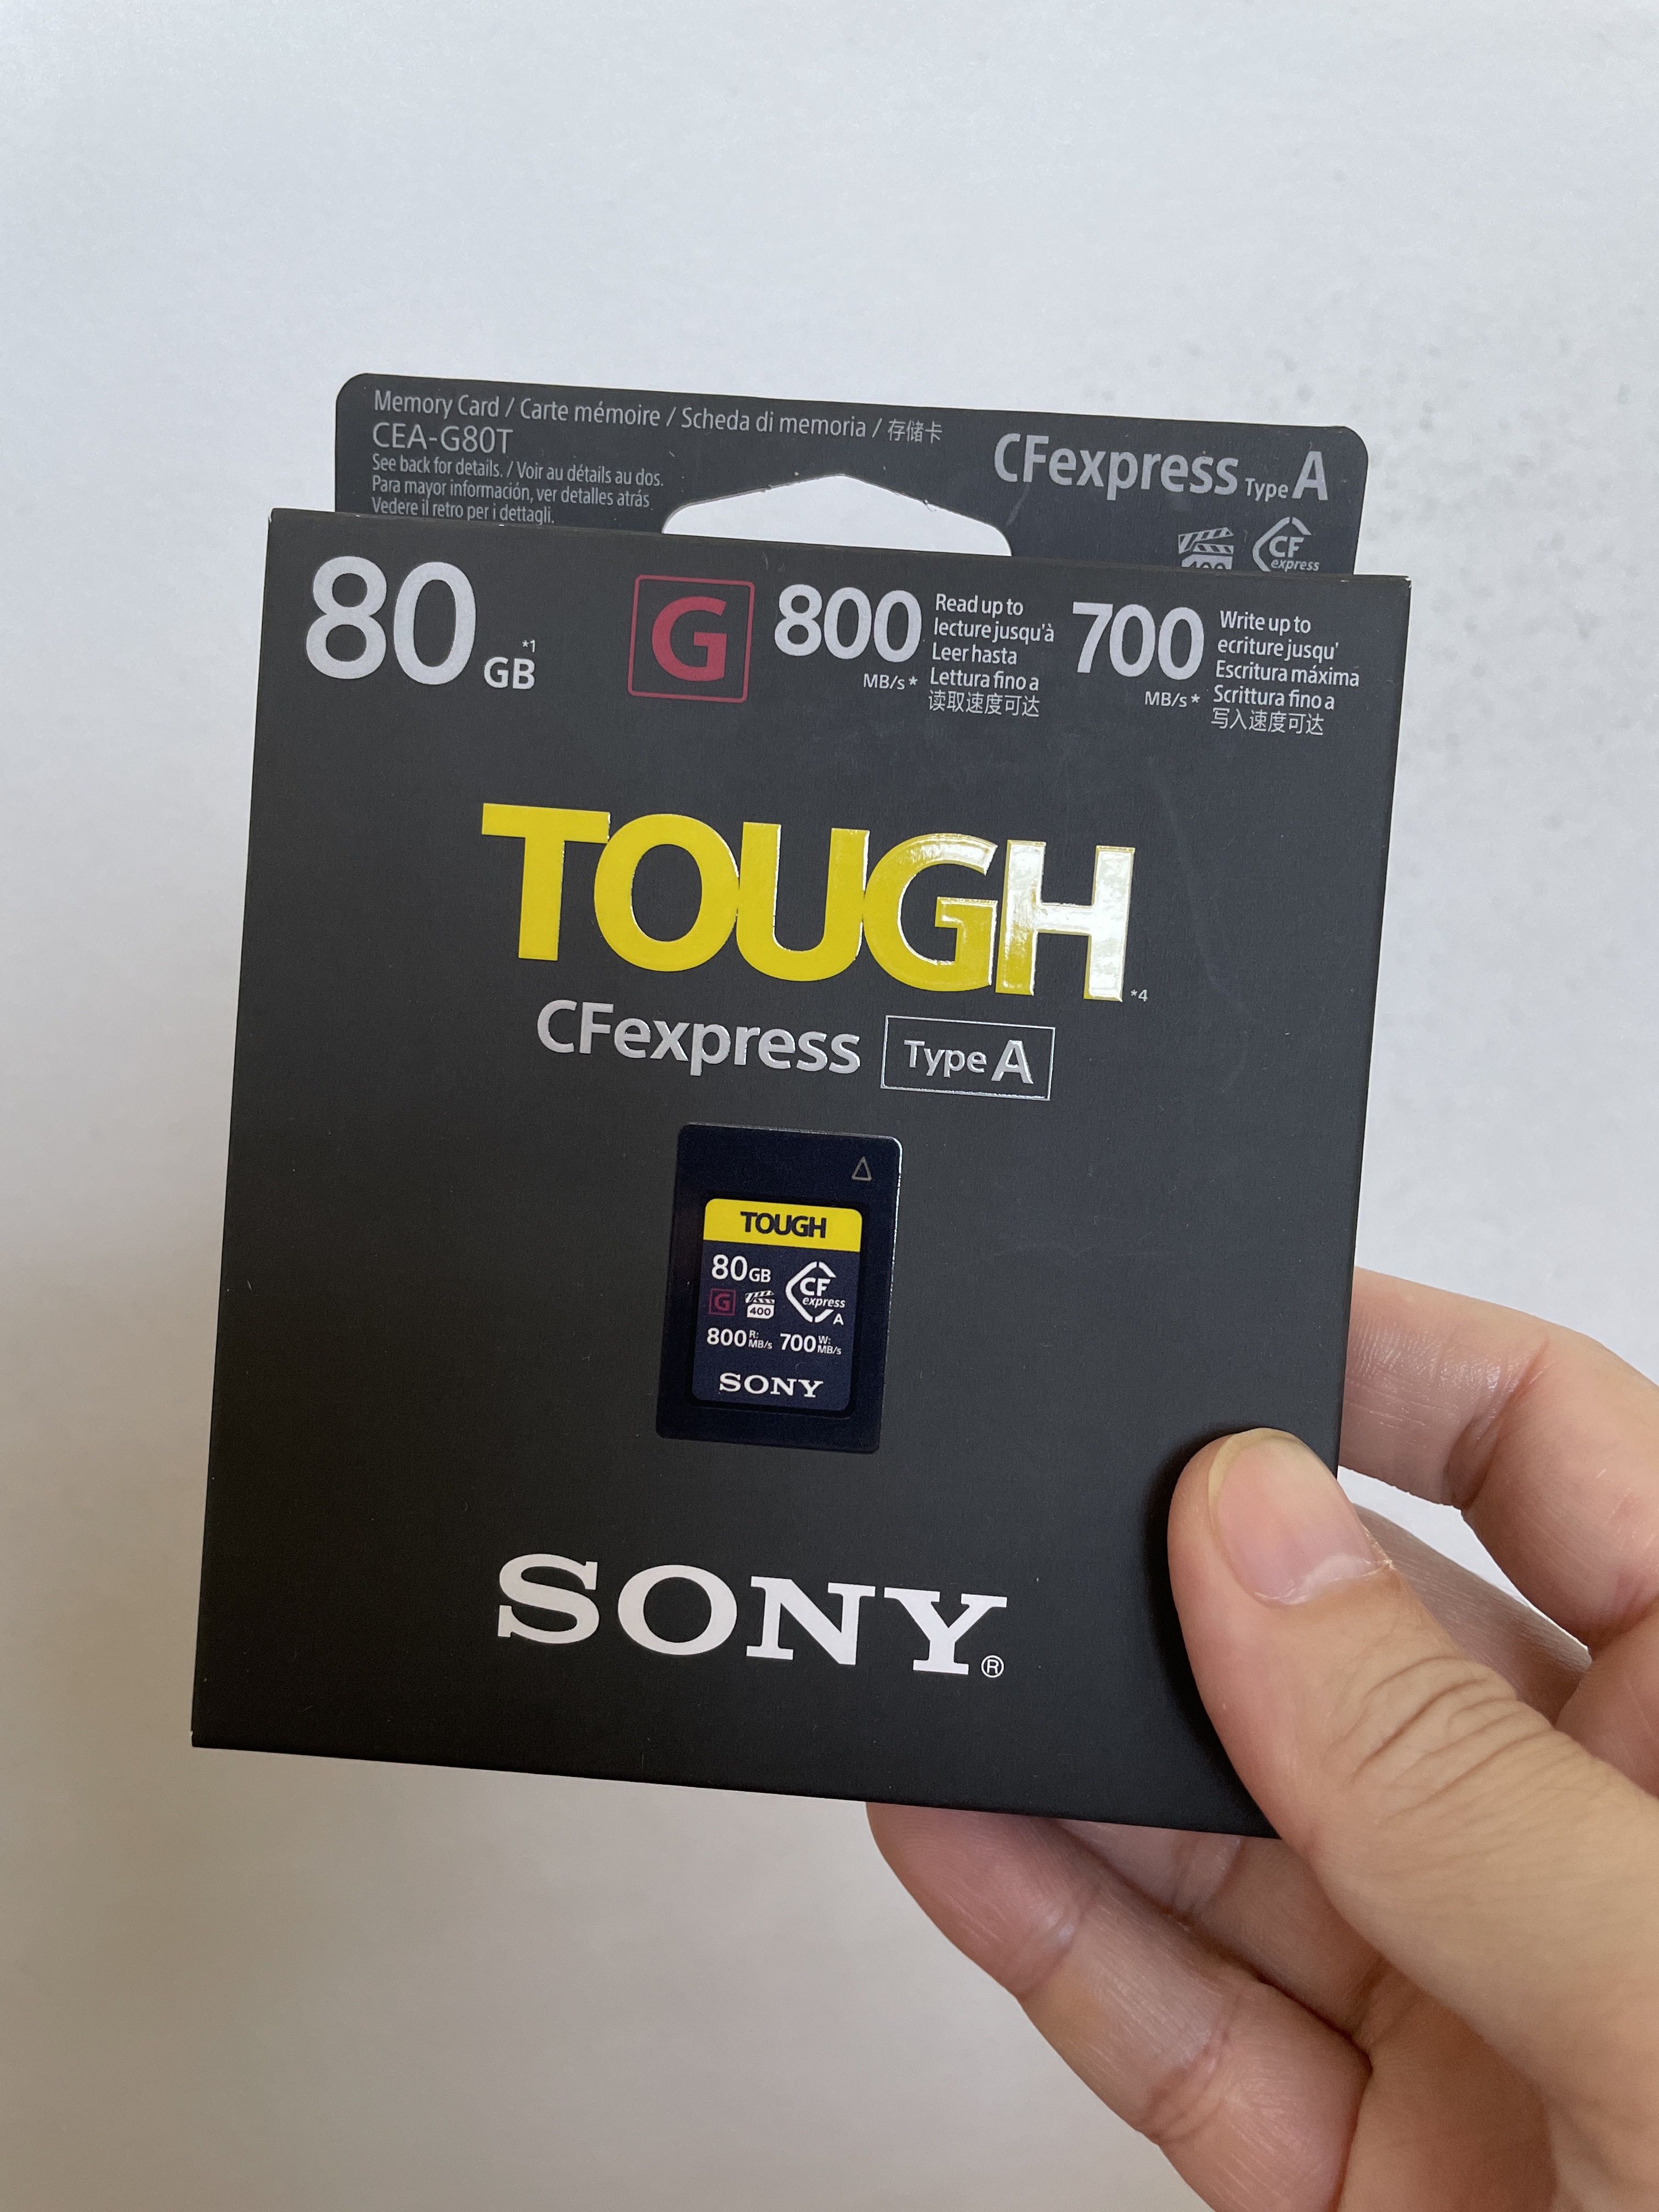 Sony CFexpress Type A TOUGH 80GB, Photography, Cameras on